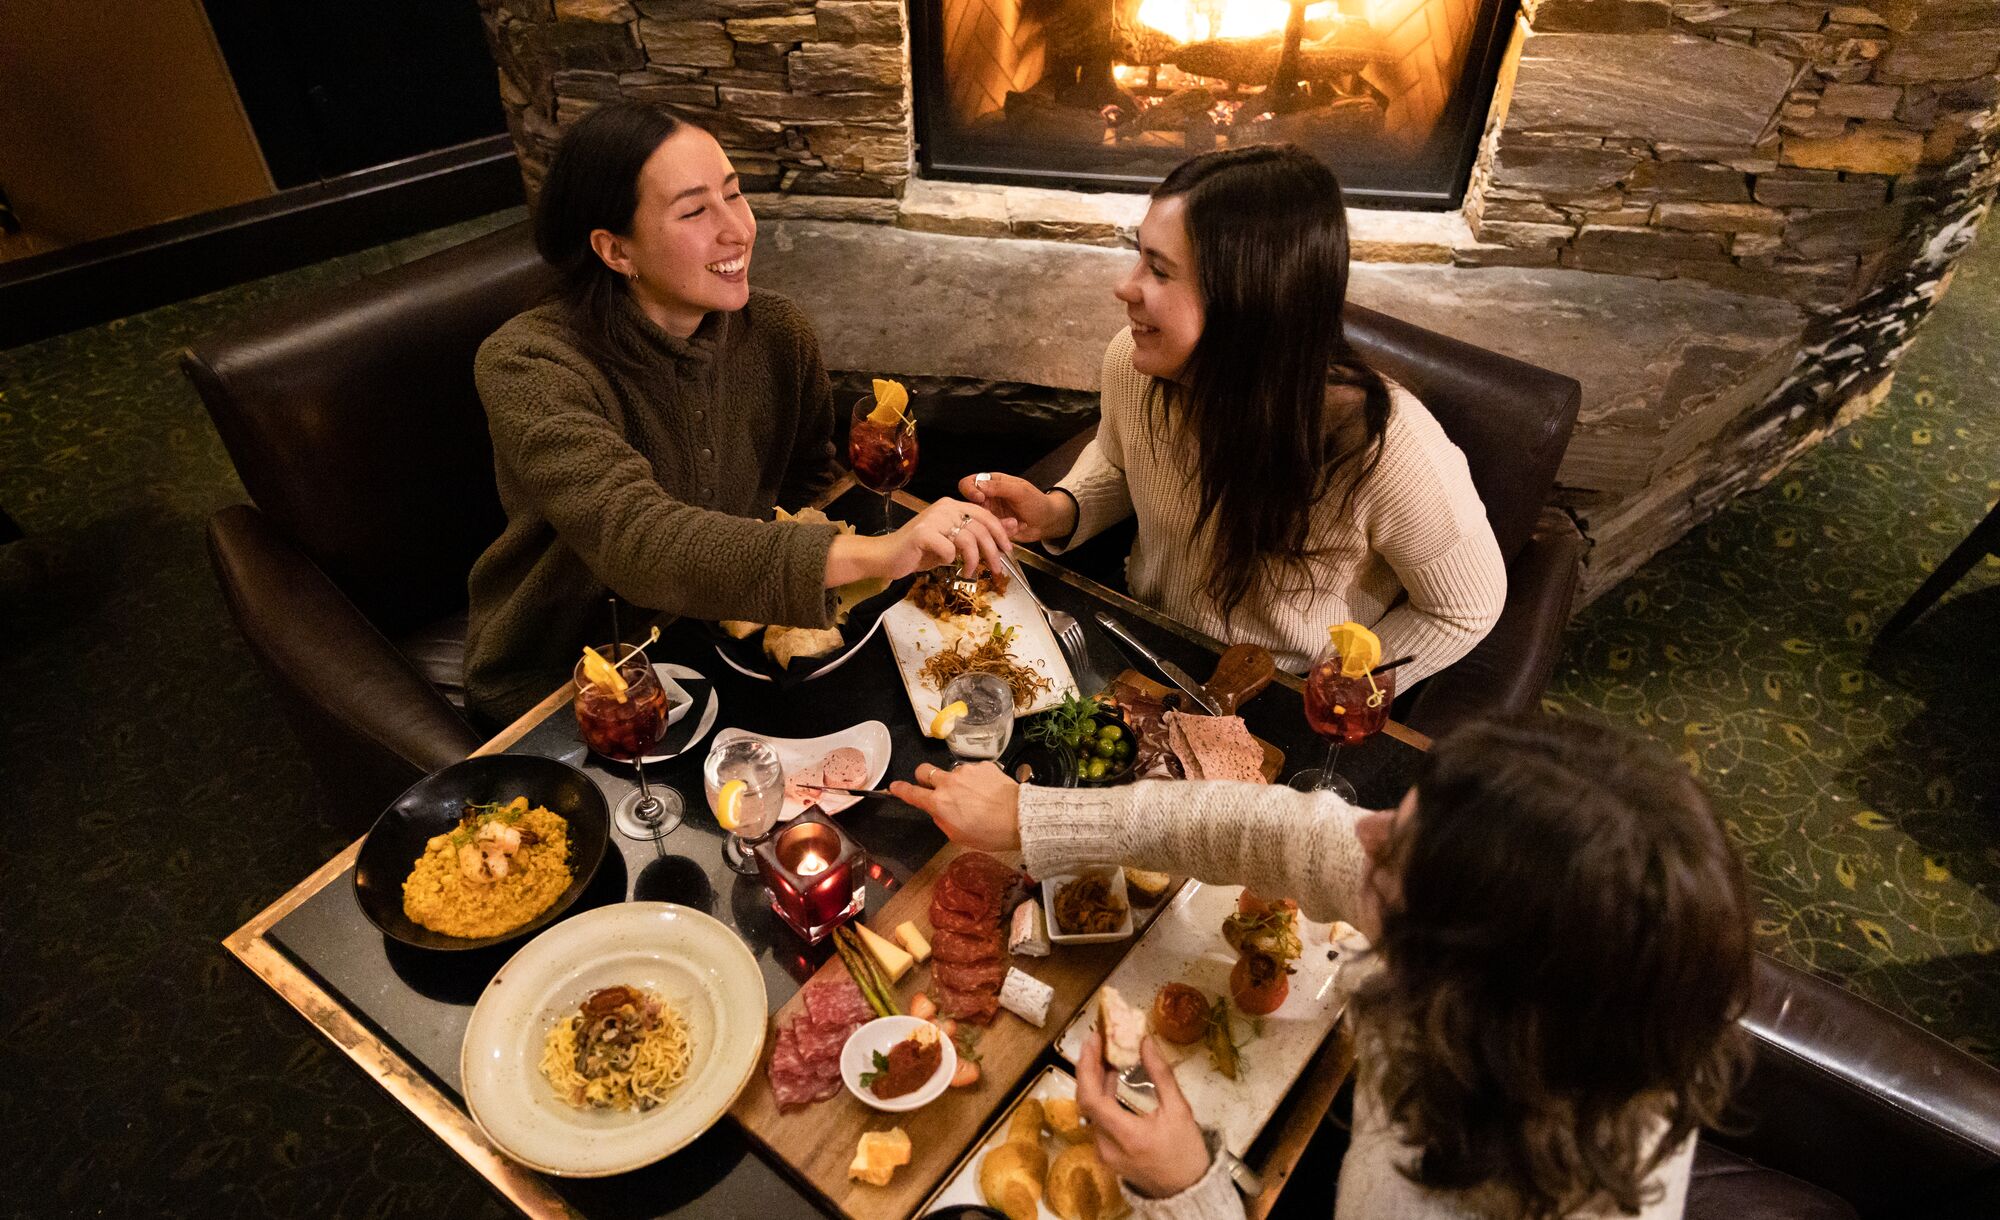 Three ladies enjoy a meal in Banff National Park. There are cheeses, meats, bread and wine on the table as seen from above and a fireplace behind them.